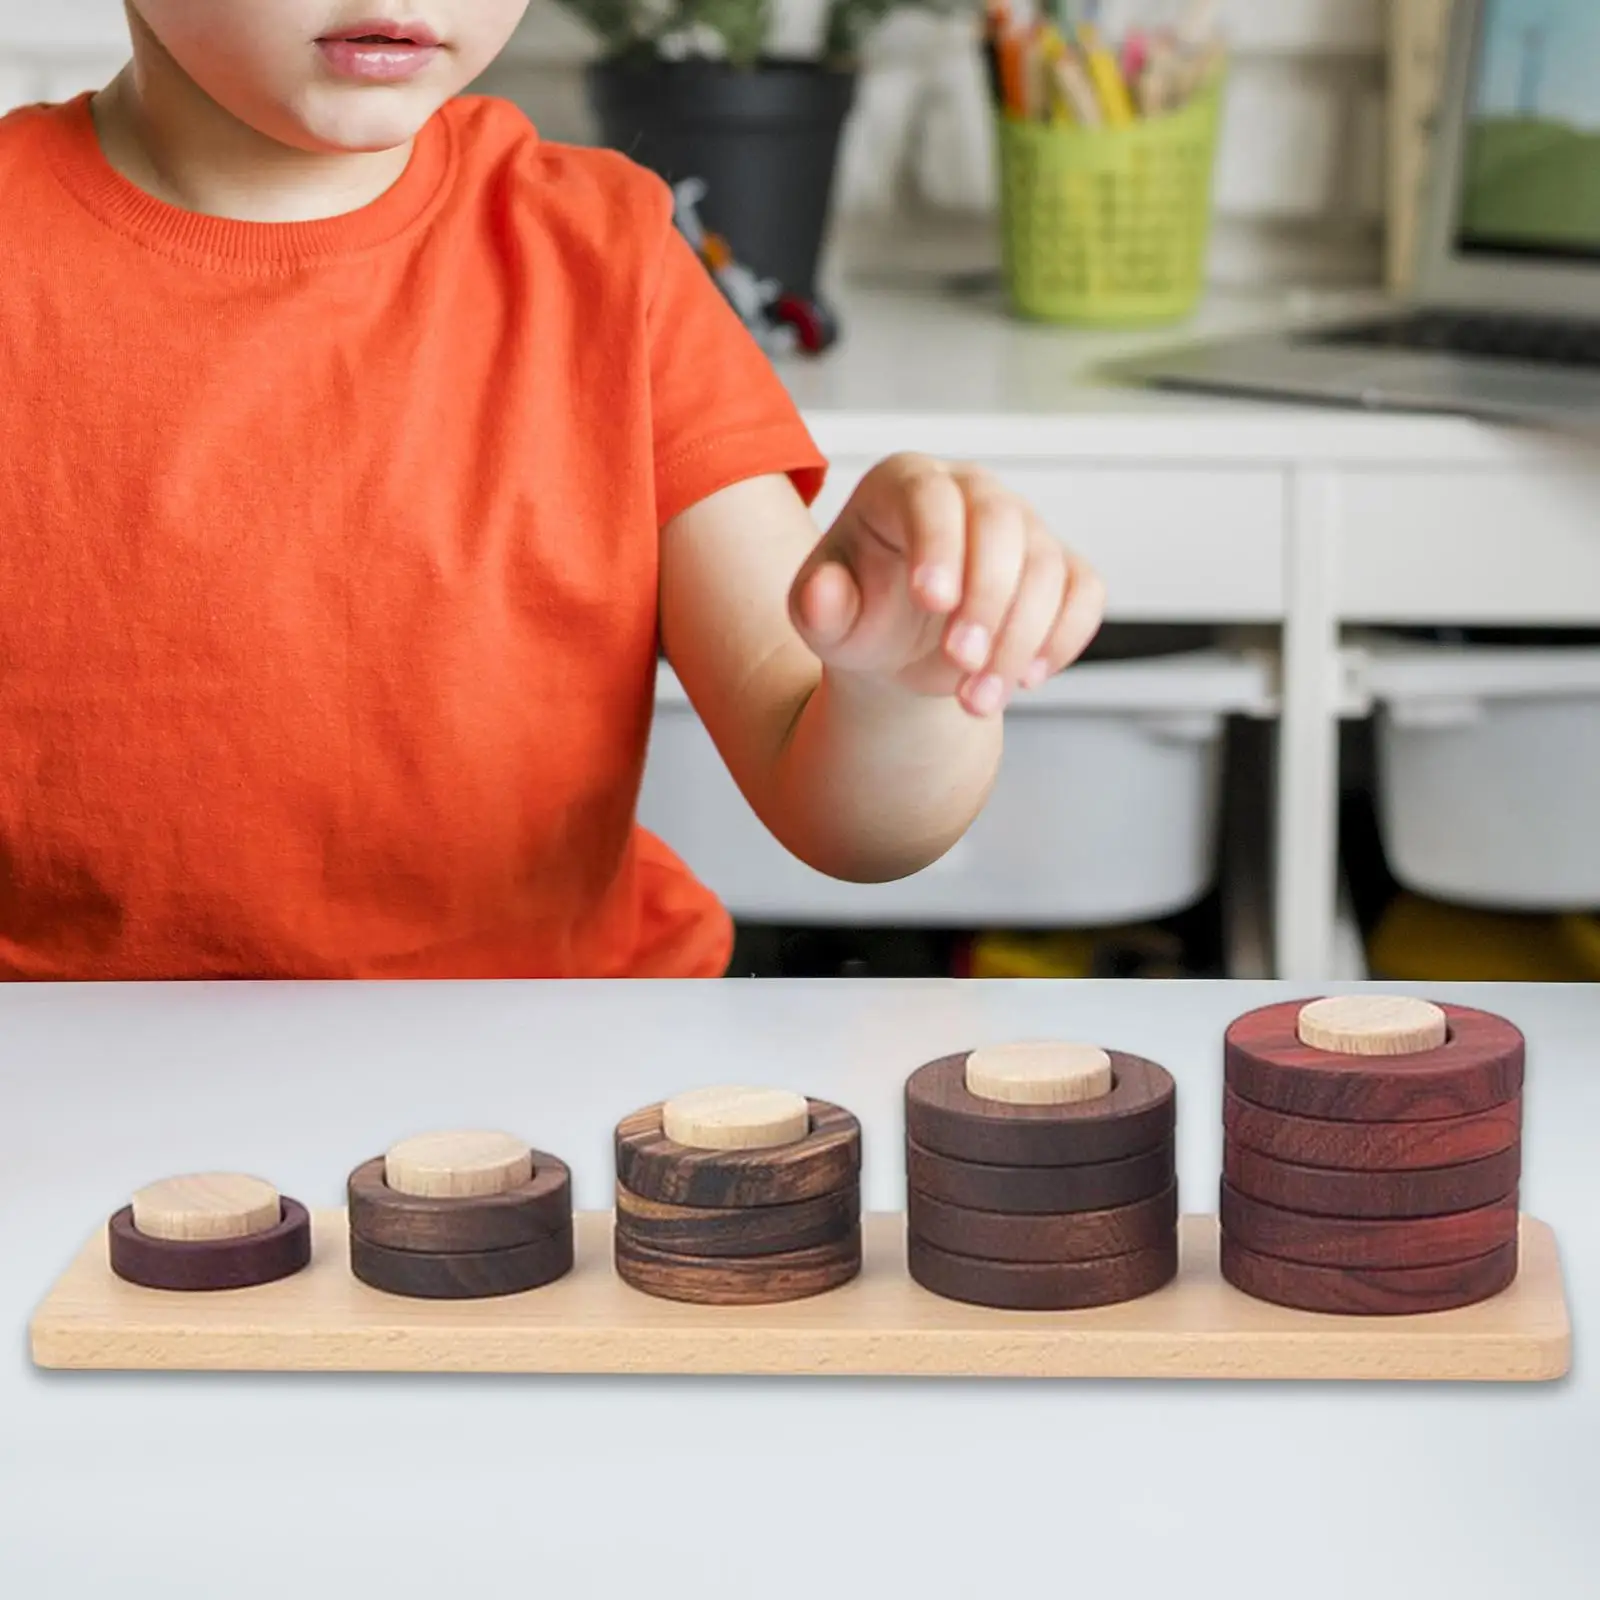 Wooden Stacking Toys Sensory Toys Early Educational Learning Toy Round Blocks for Girls Boy Children Toddlers Birthday Gifts